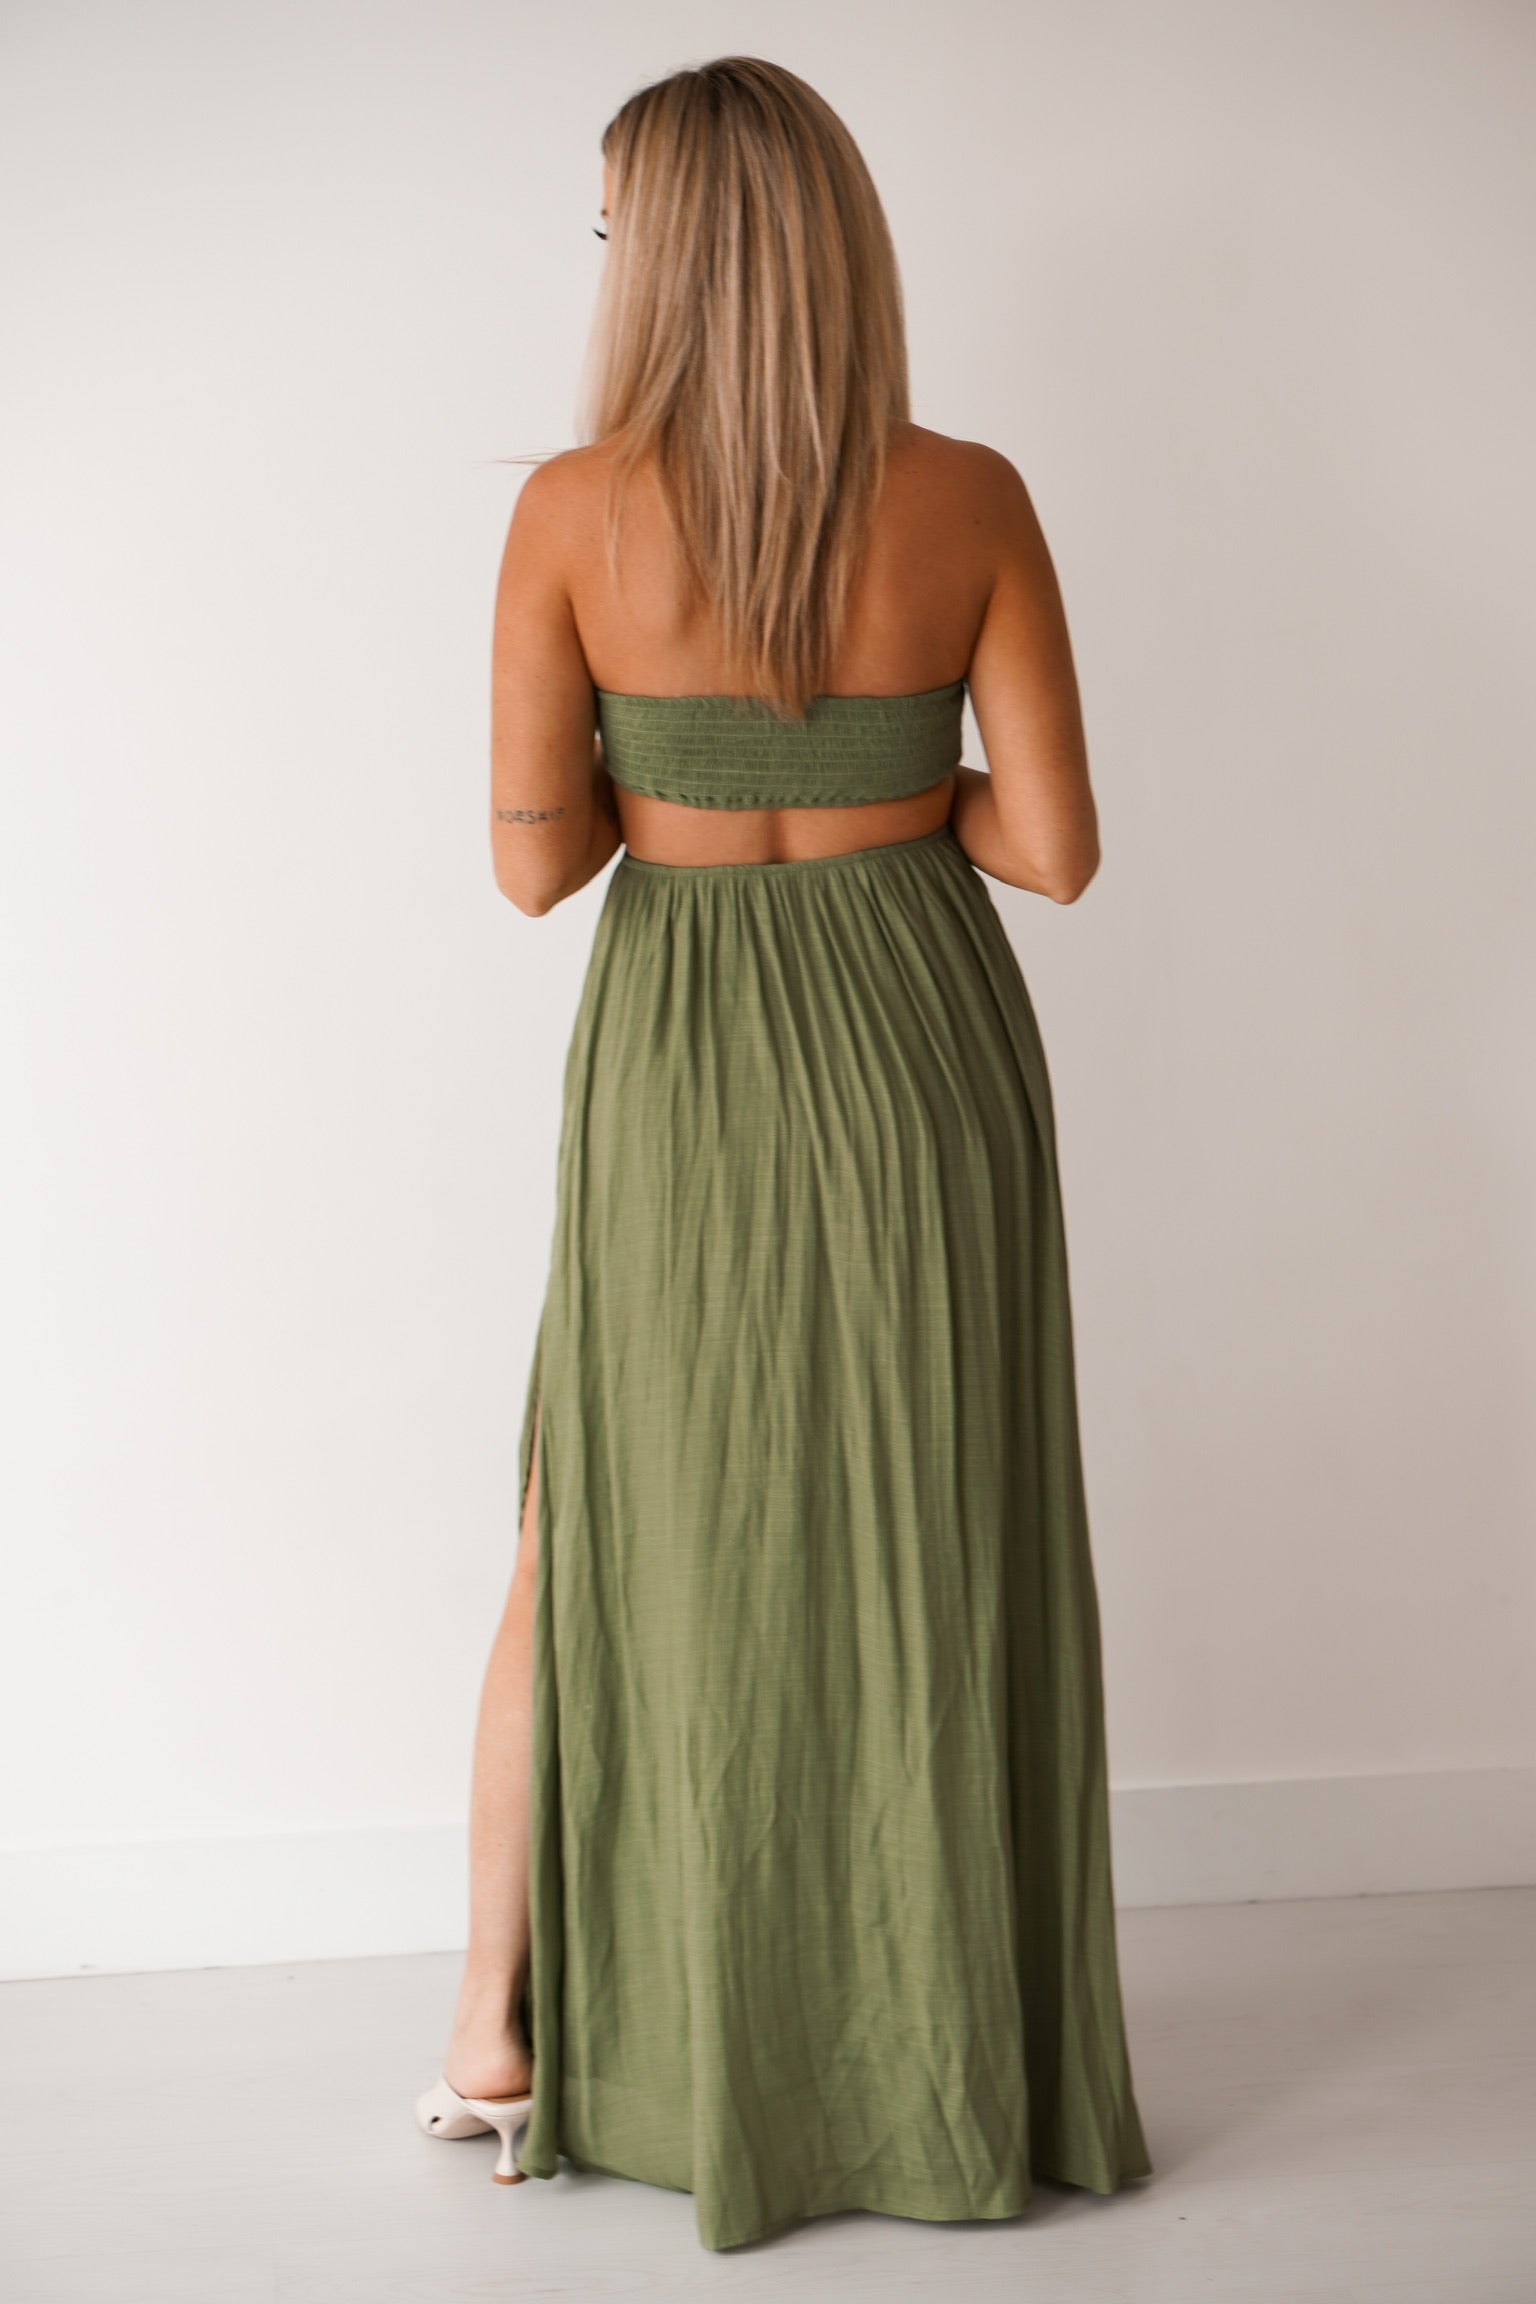 girl standing against a white wall wearing a long green dress that has cutouts on the side of the hips. SHe is wearing sandals. She is showing off the back of the dress which is open on the lower back 